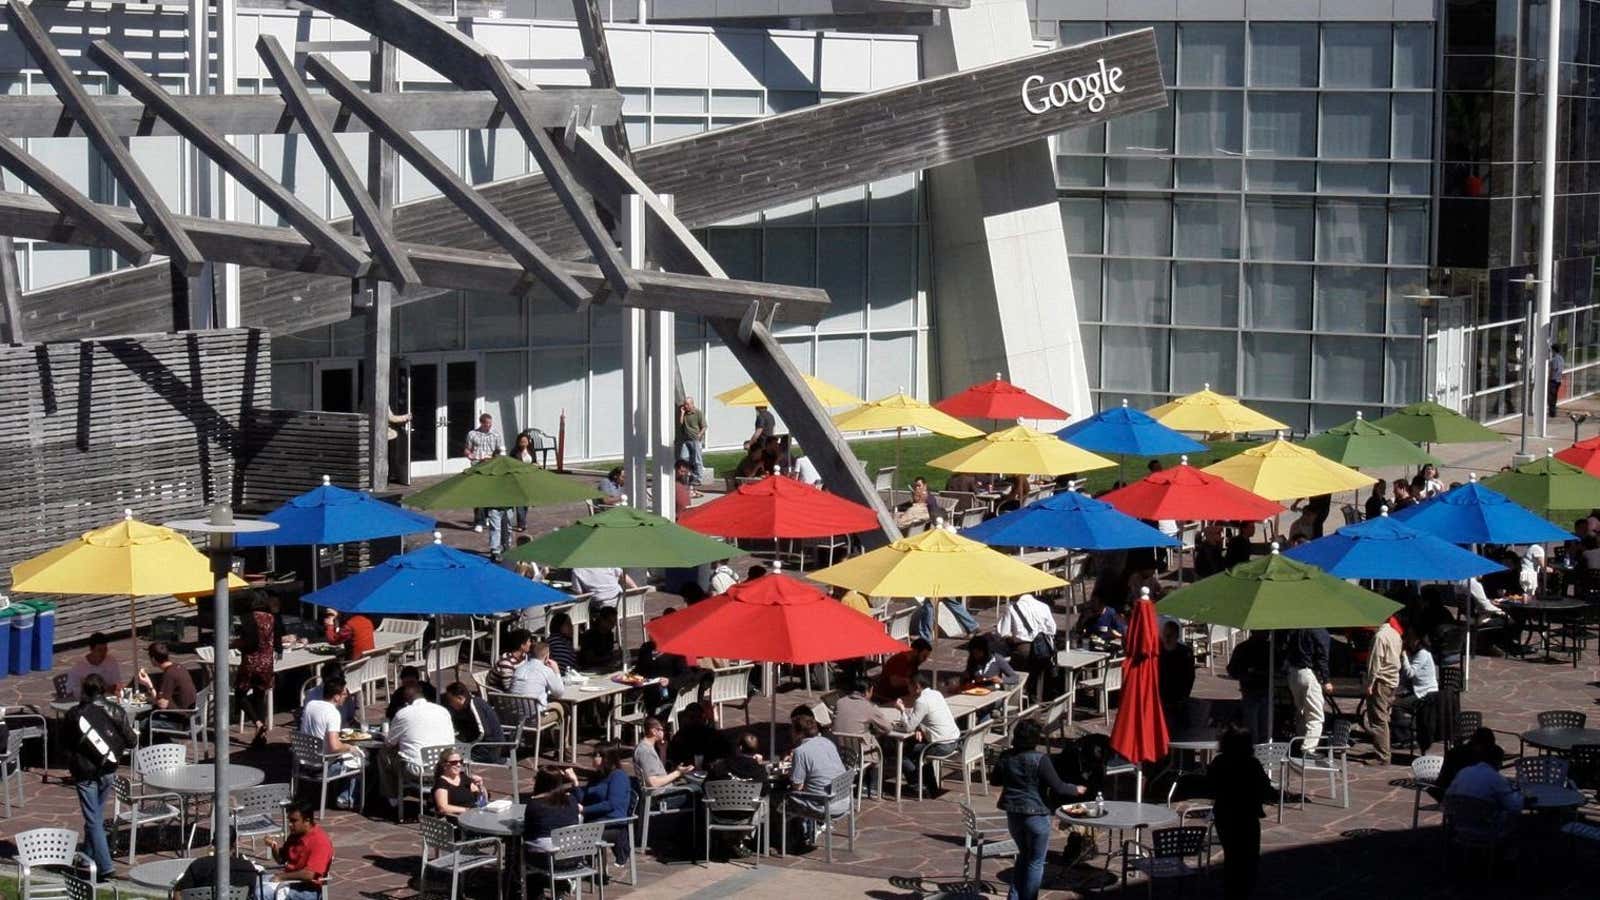 Google works hard to keep employees happy.